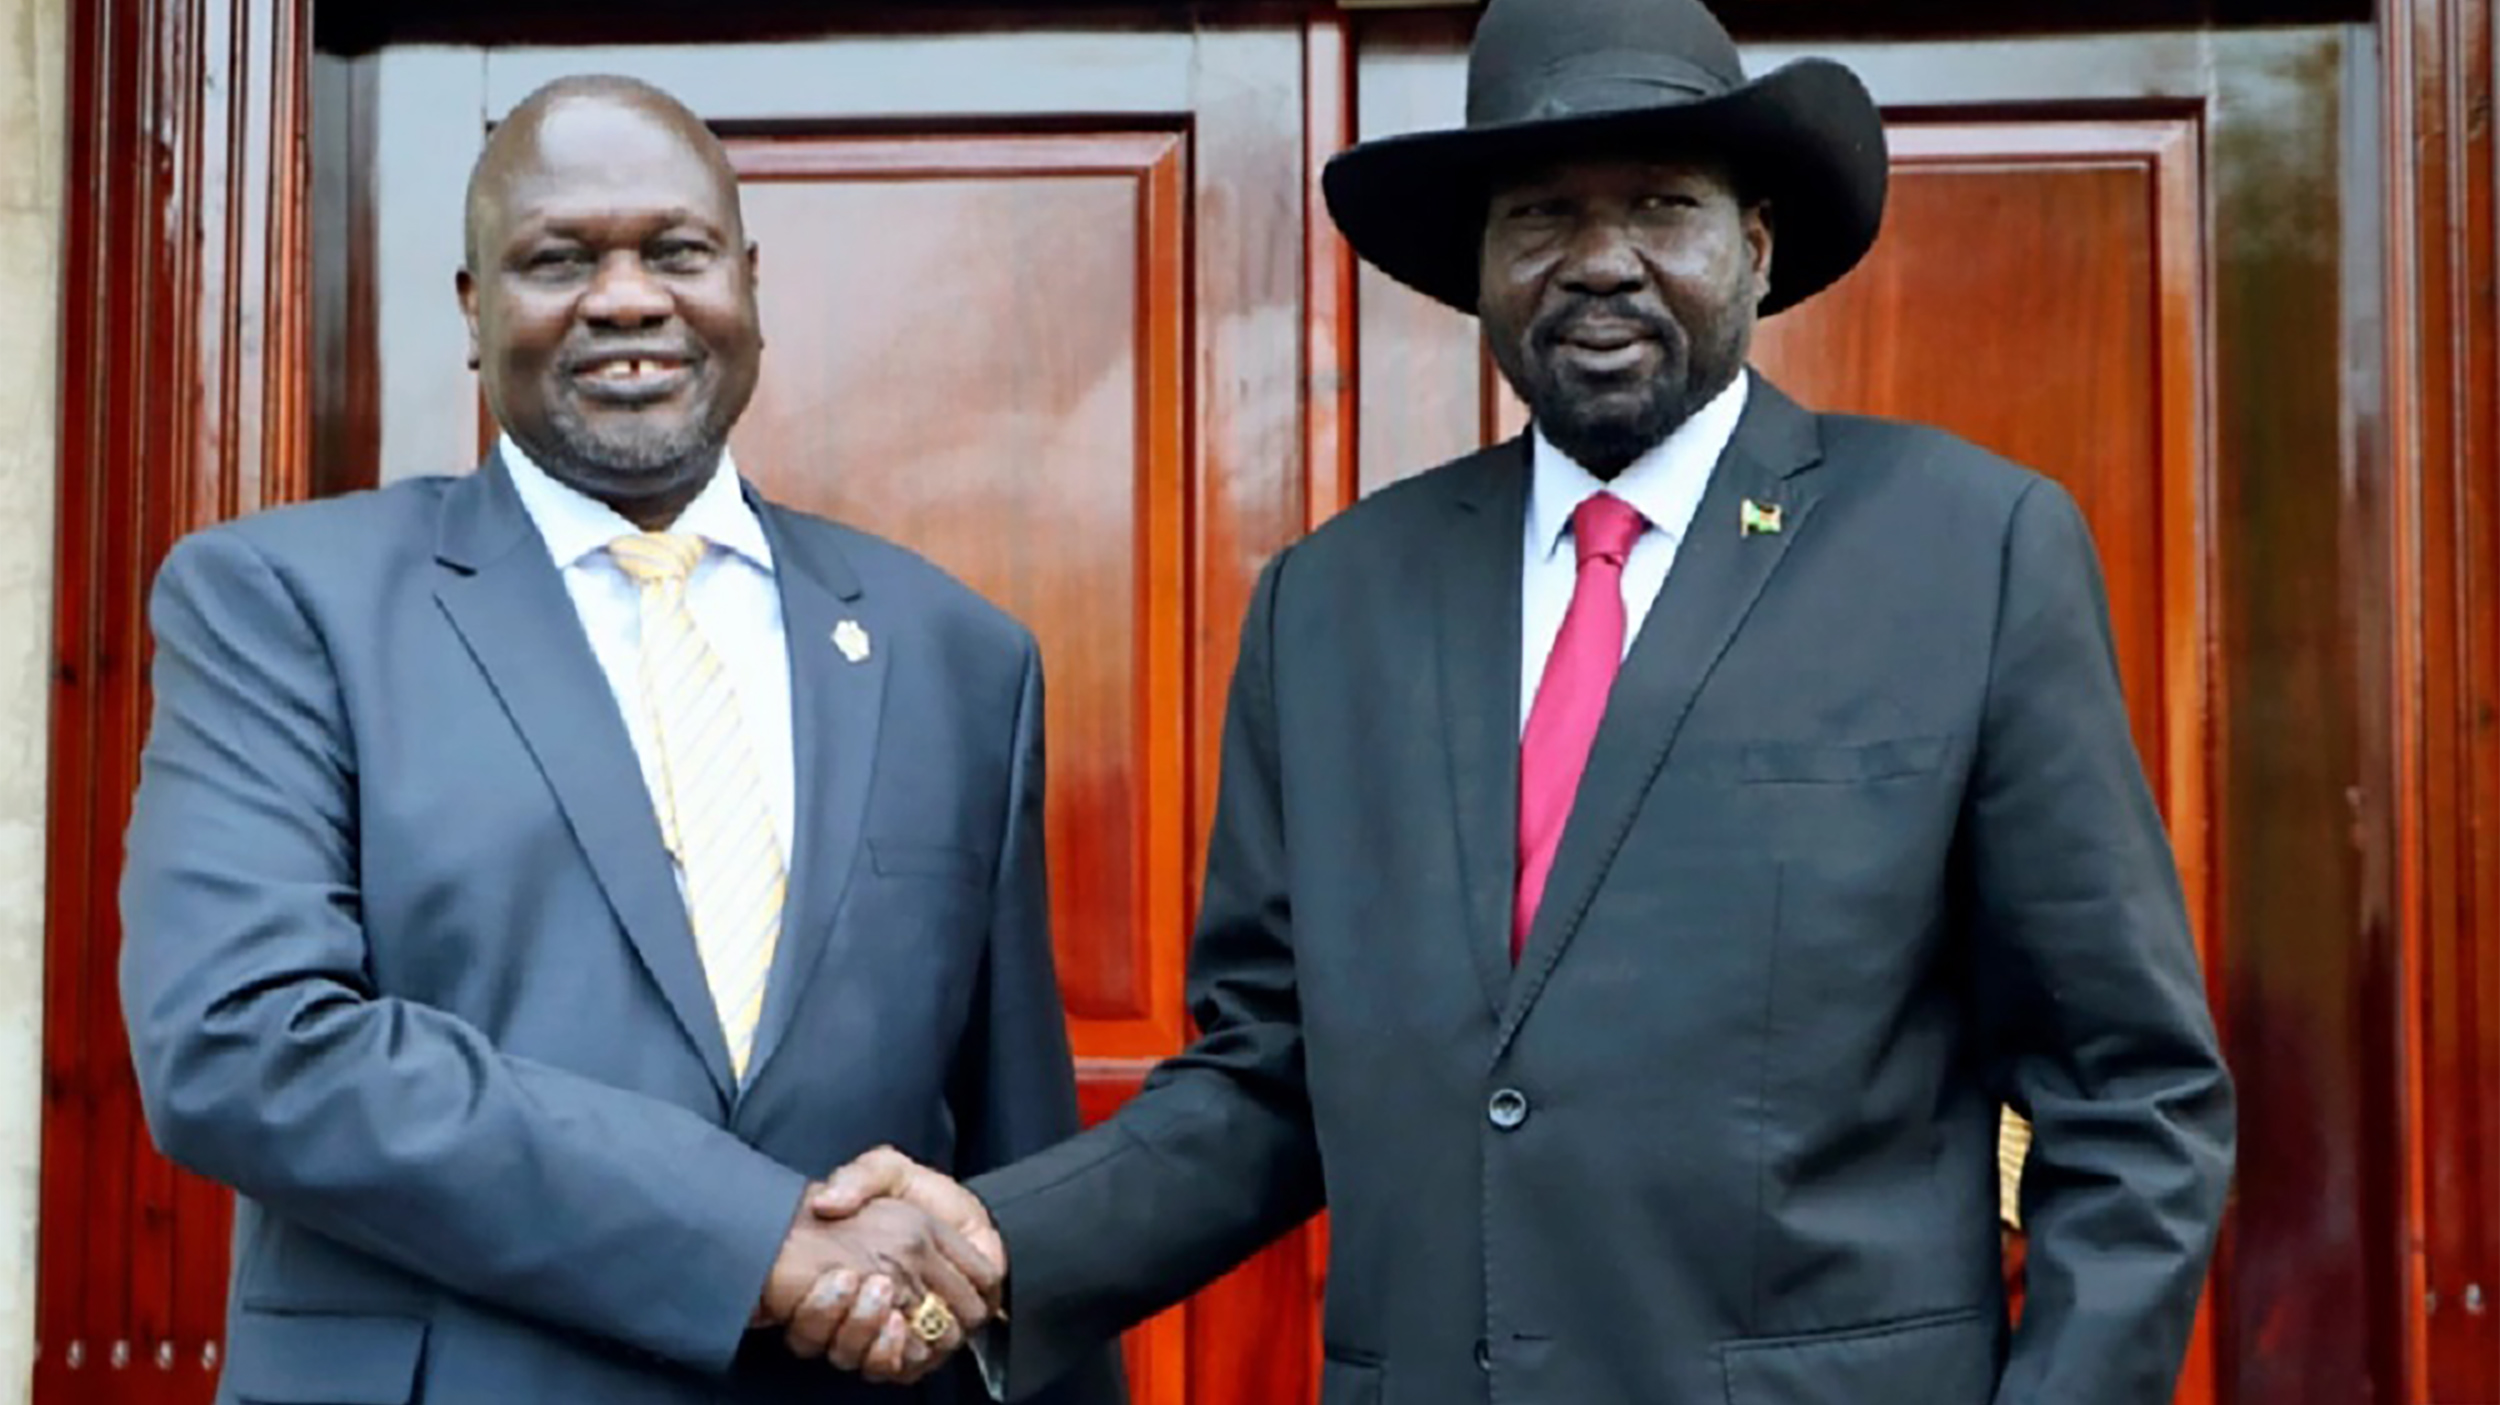 With elections approaching in South Sudan: What will happen to the peace agreement?